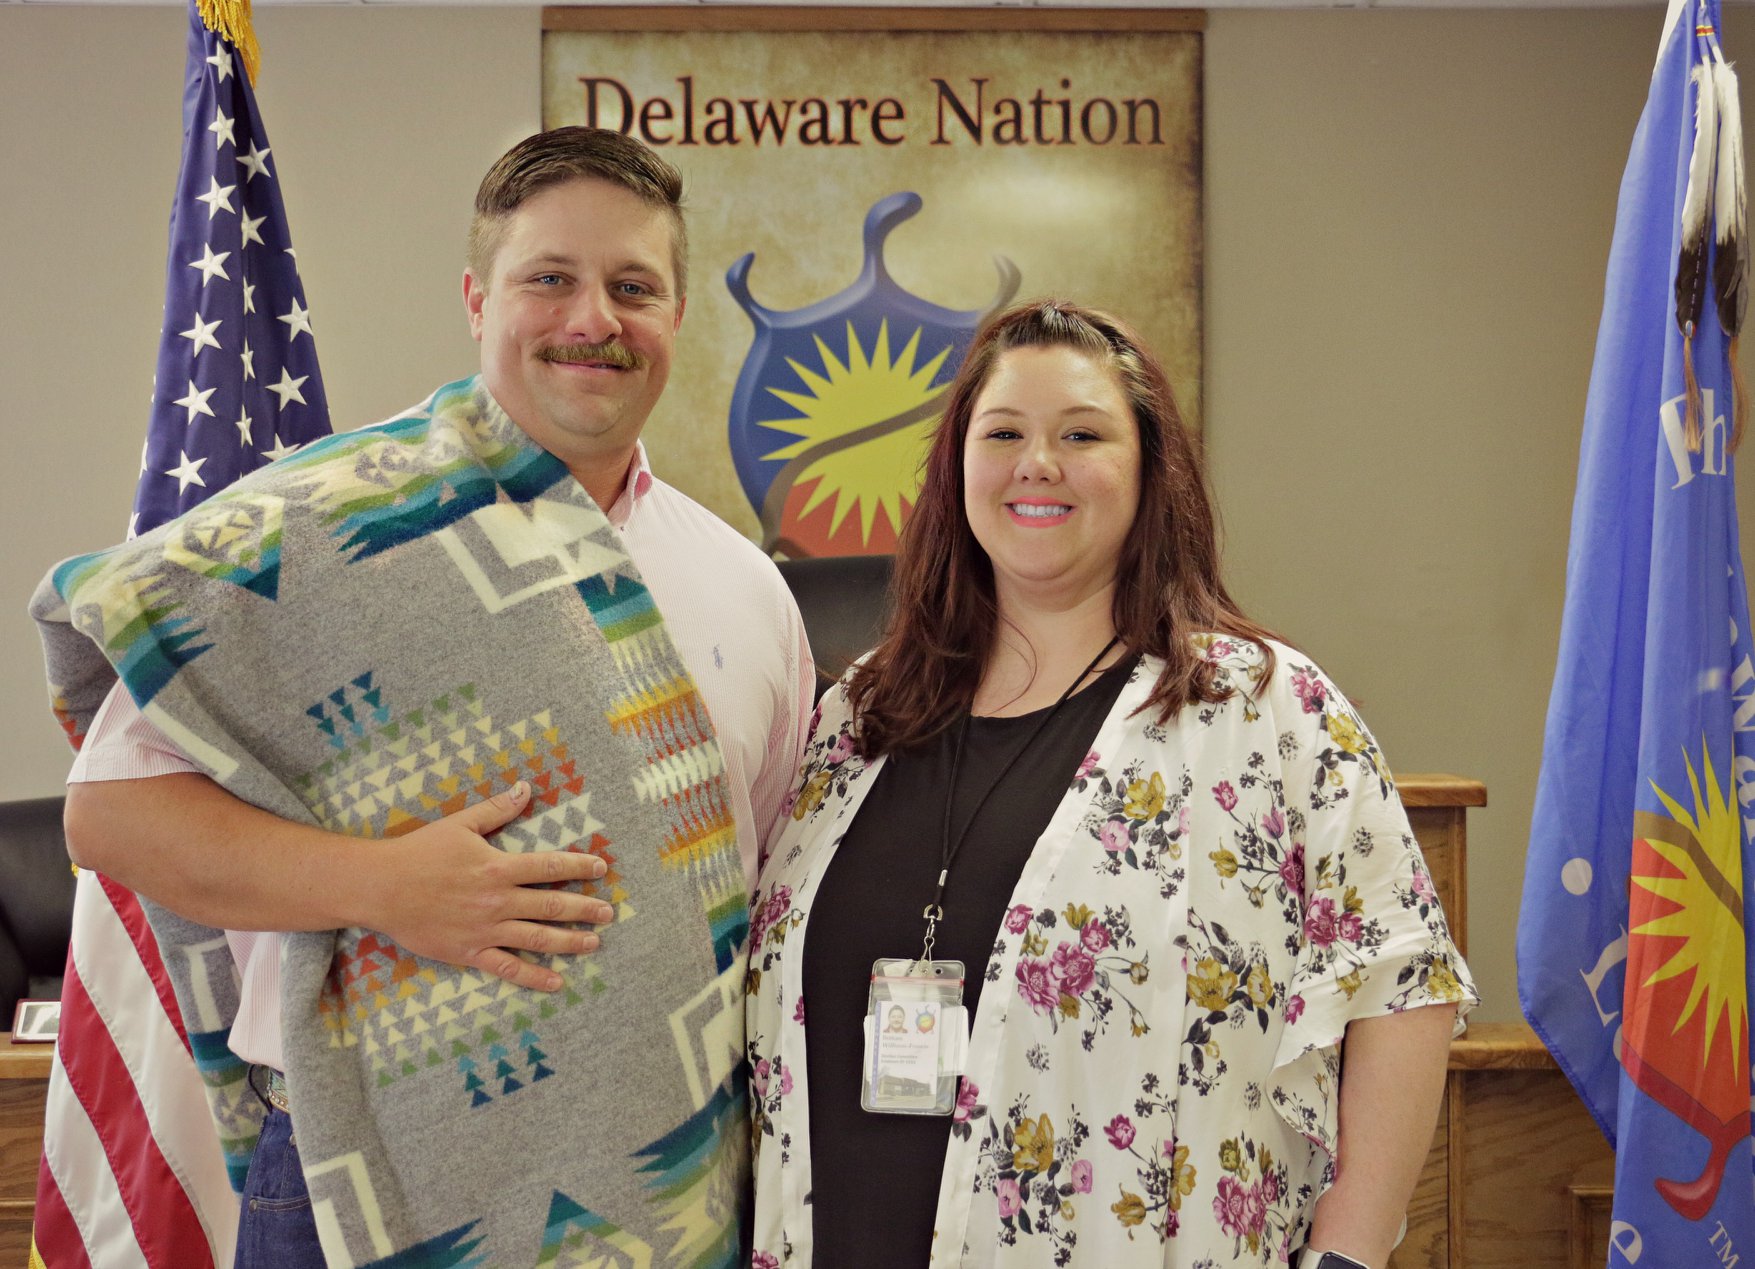 Offices CLOSED In Observance of Delaware Nation Day